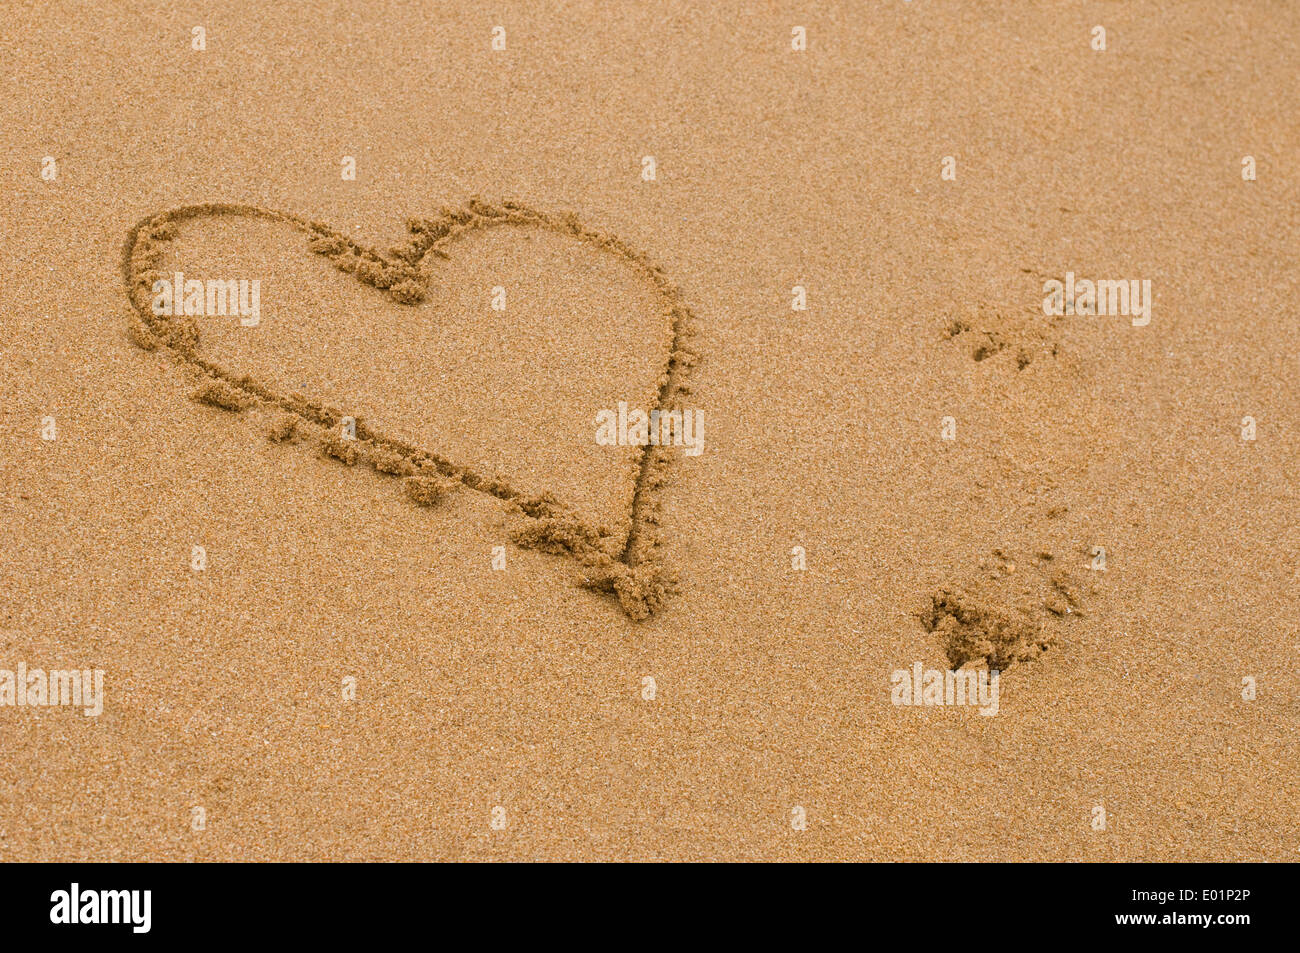 love heart drawn in the sand next to two dog footprints Stock Photo